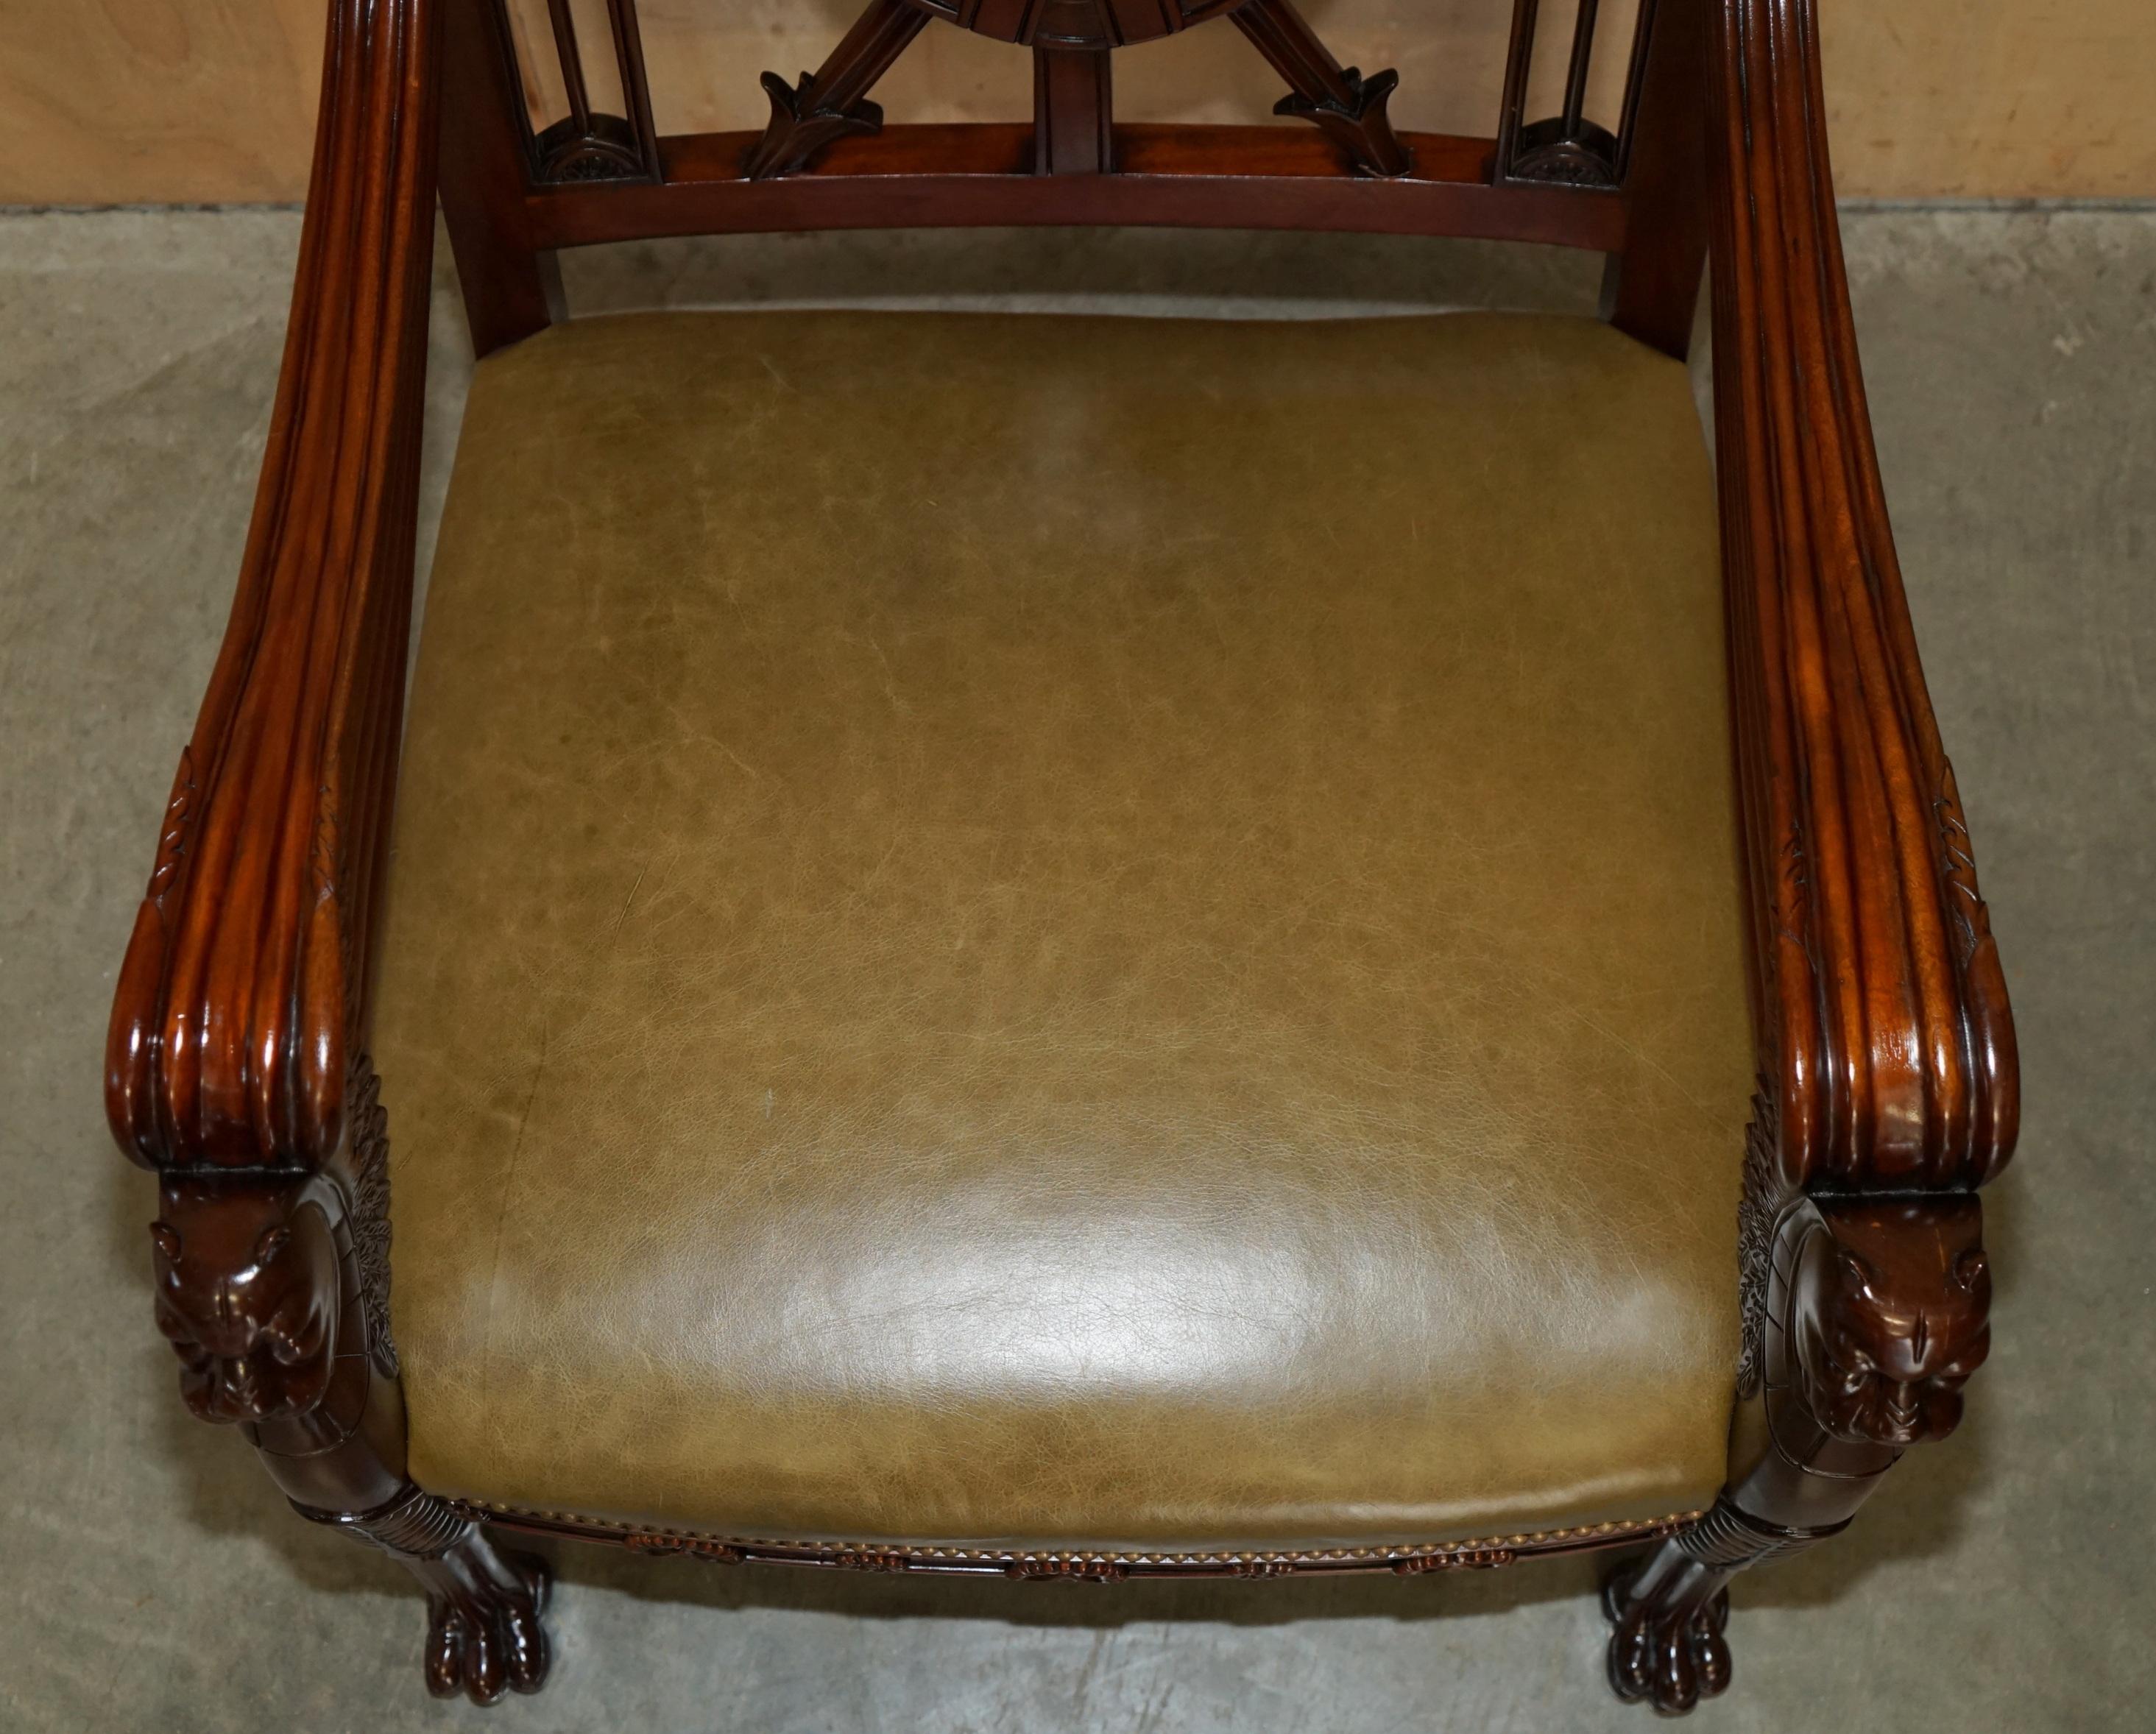 EXQUISITE PAIR OF HAND CARved HARDWOOD LiBRARY ARMCHAIRS LION GRIFFON WING ARMS im Angebot 6